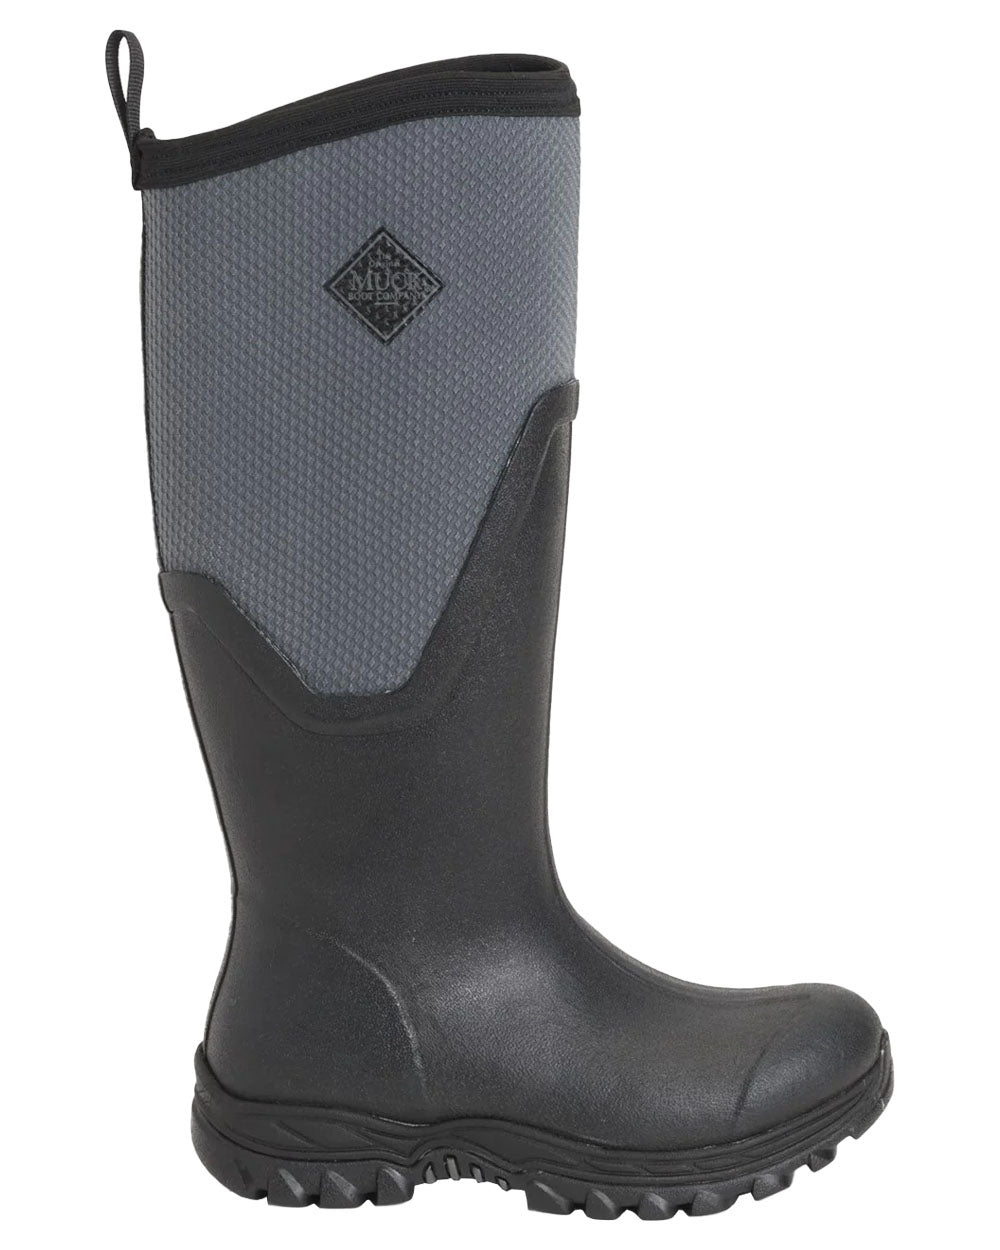 Black Grey coloured Muck Boots Womens Artic Sport II Tall Wellingtons on White background 